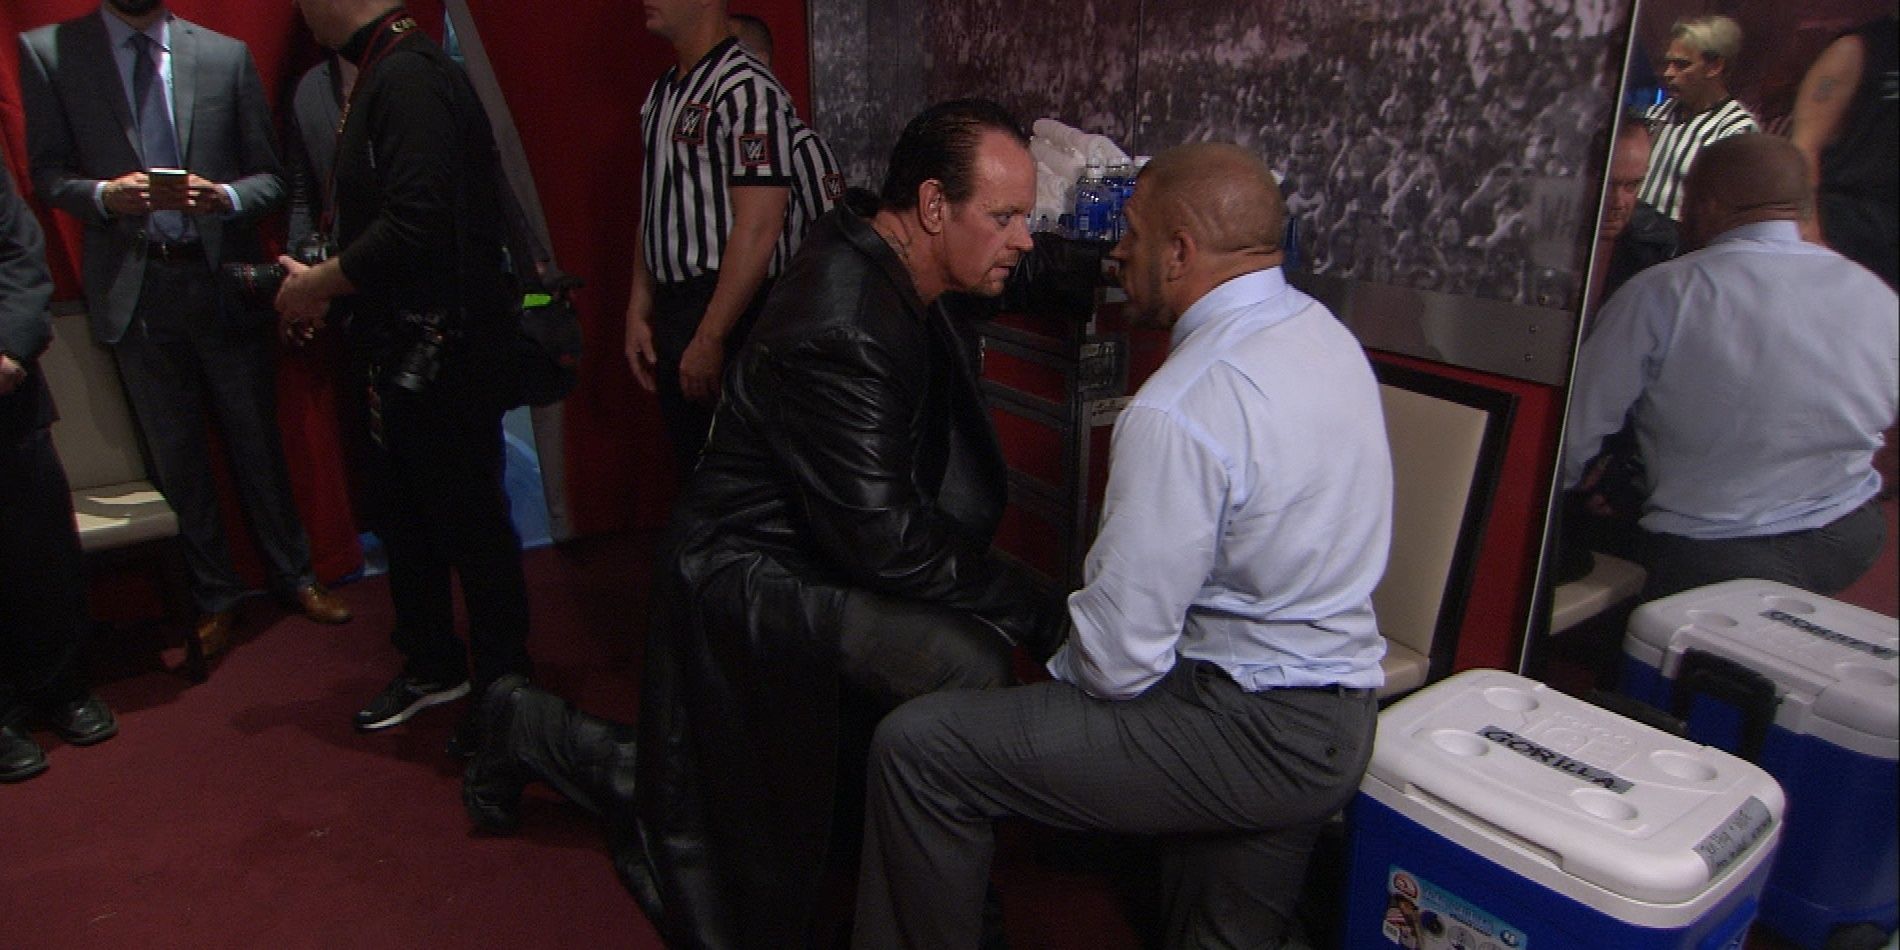 Undertaker and Triple H backstage